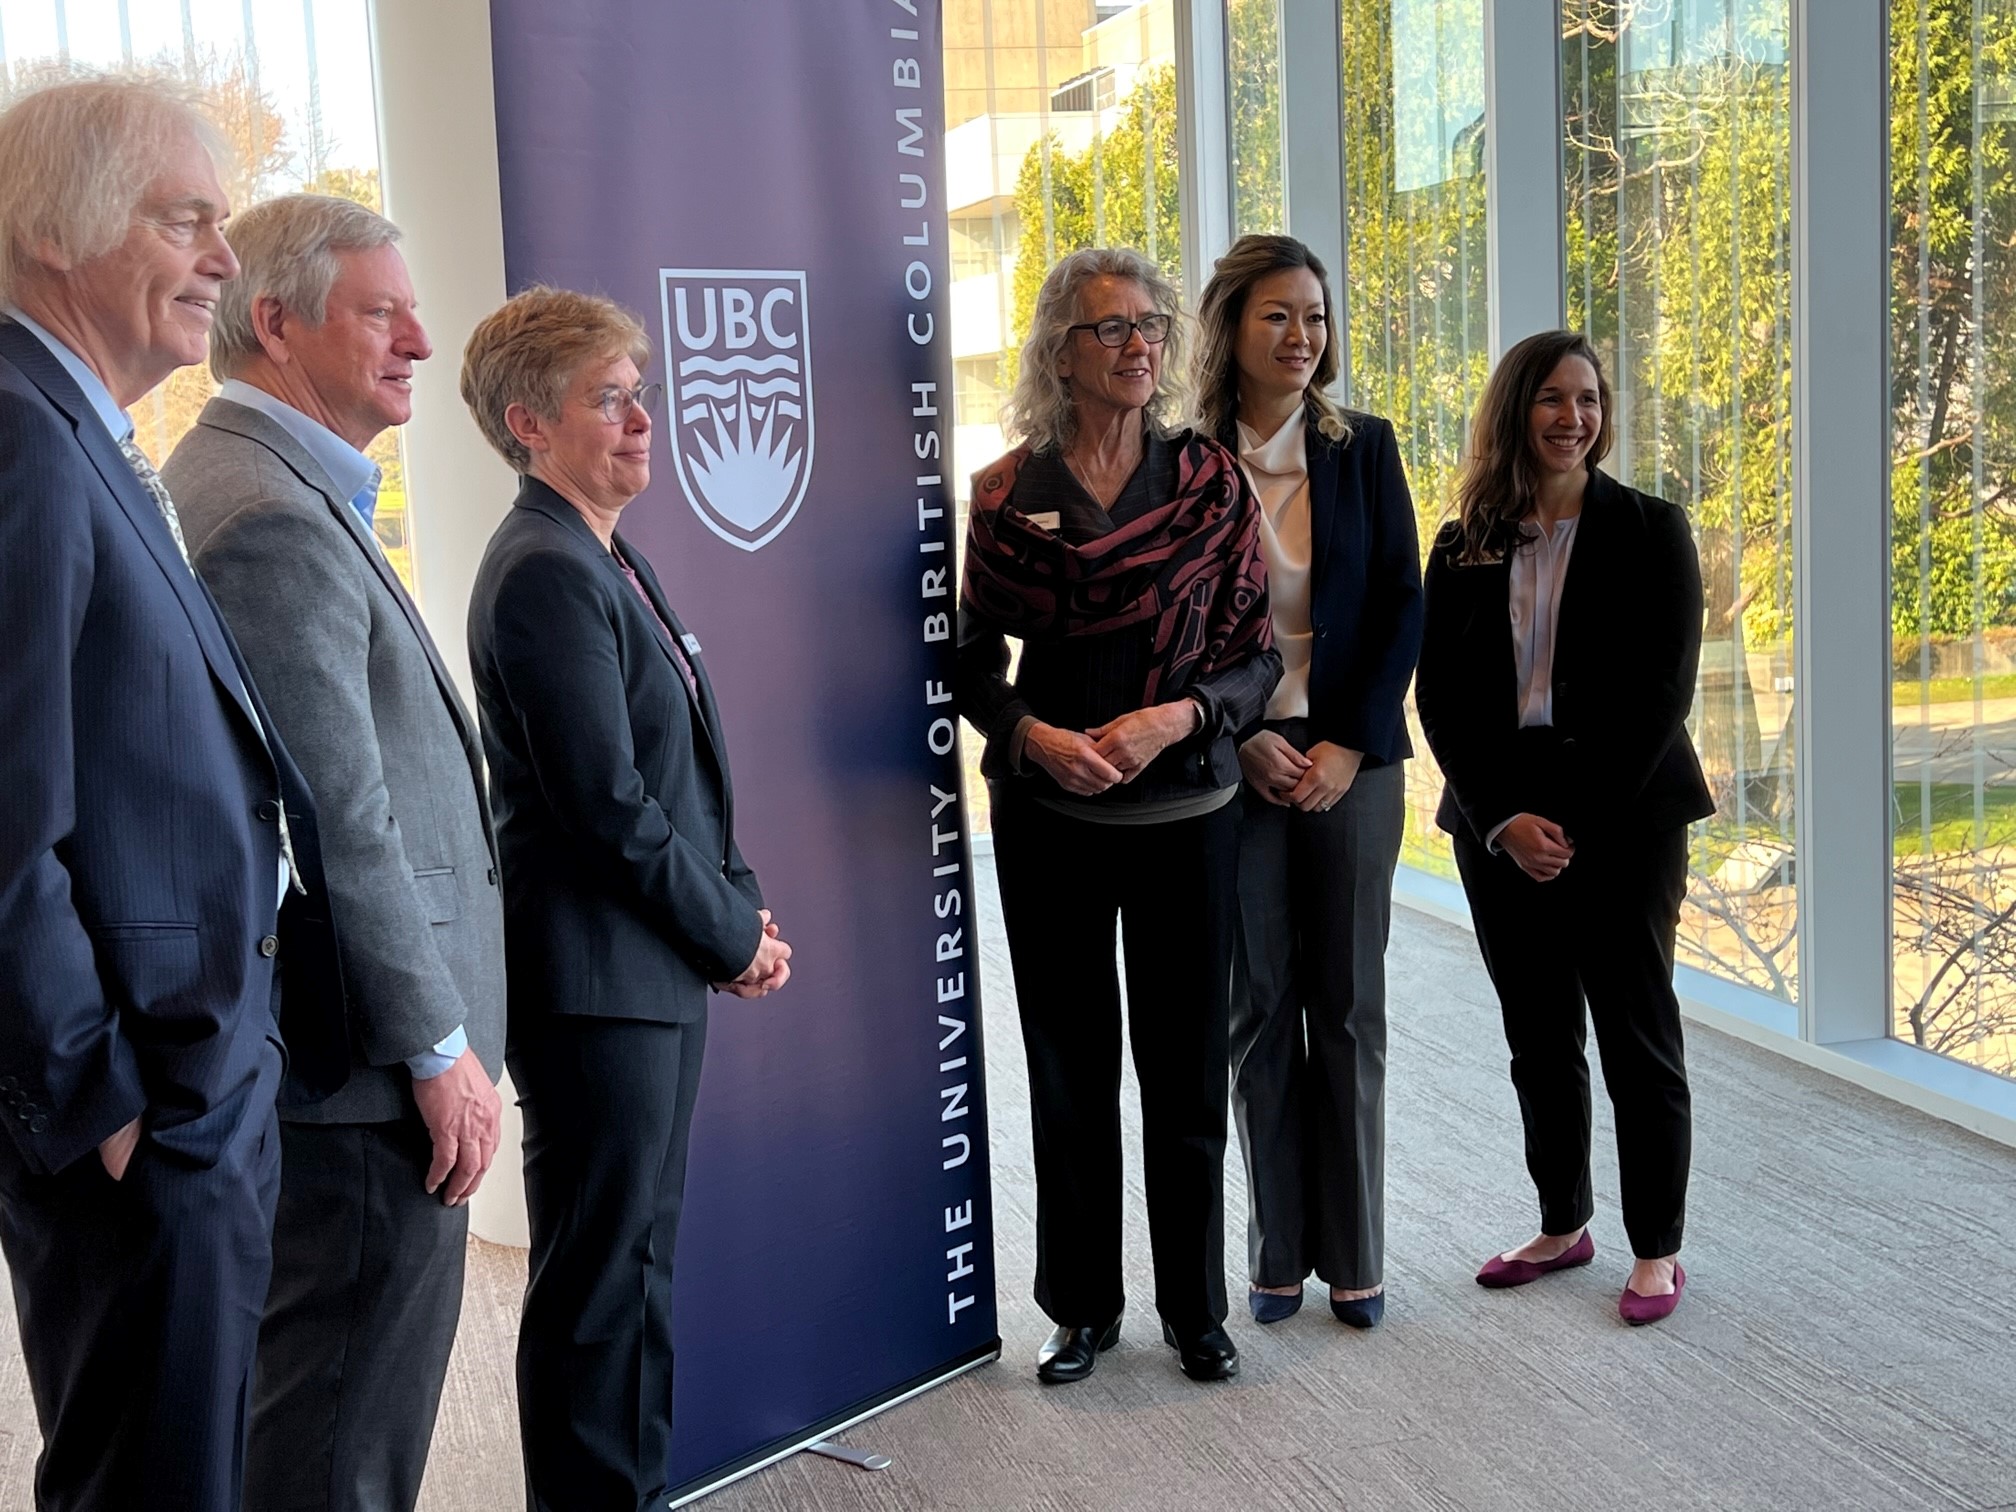 Partnering with UBC on Canada’s Immuno-Engineering and Biomanufacturing Hub